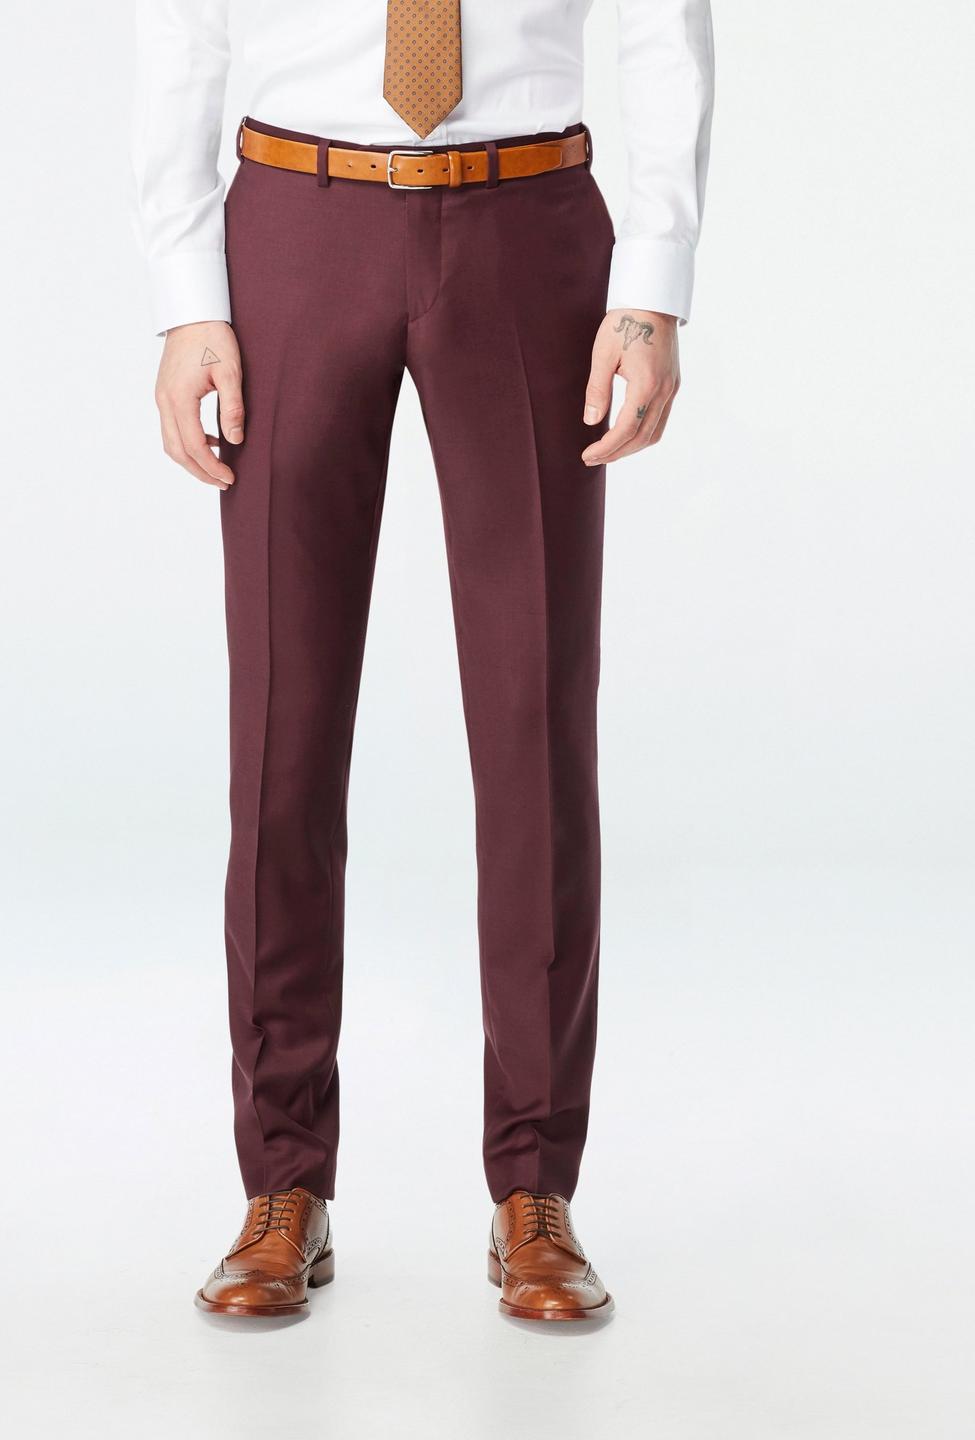 Burgundy pants - Hemsworth Solid Design from Premium Indochino Collection